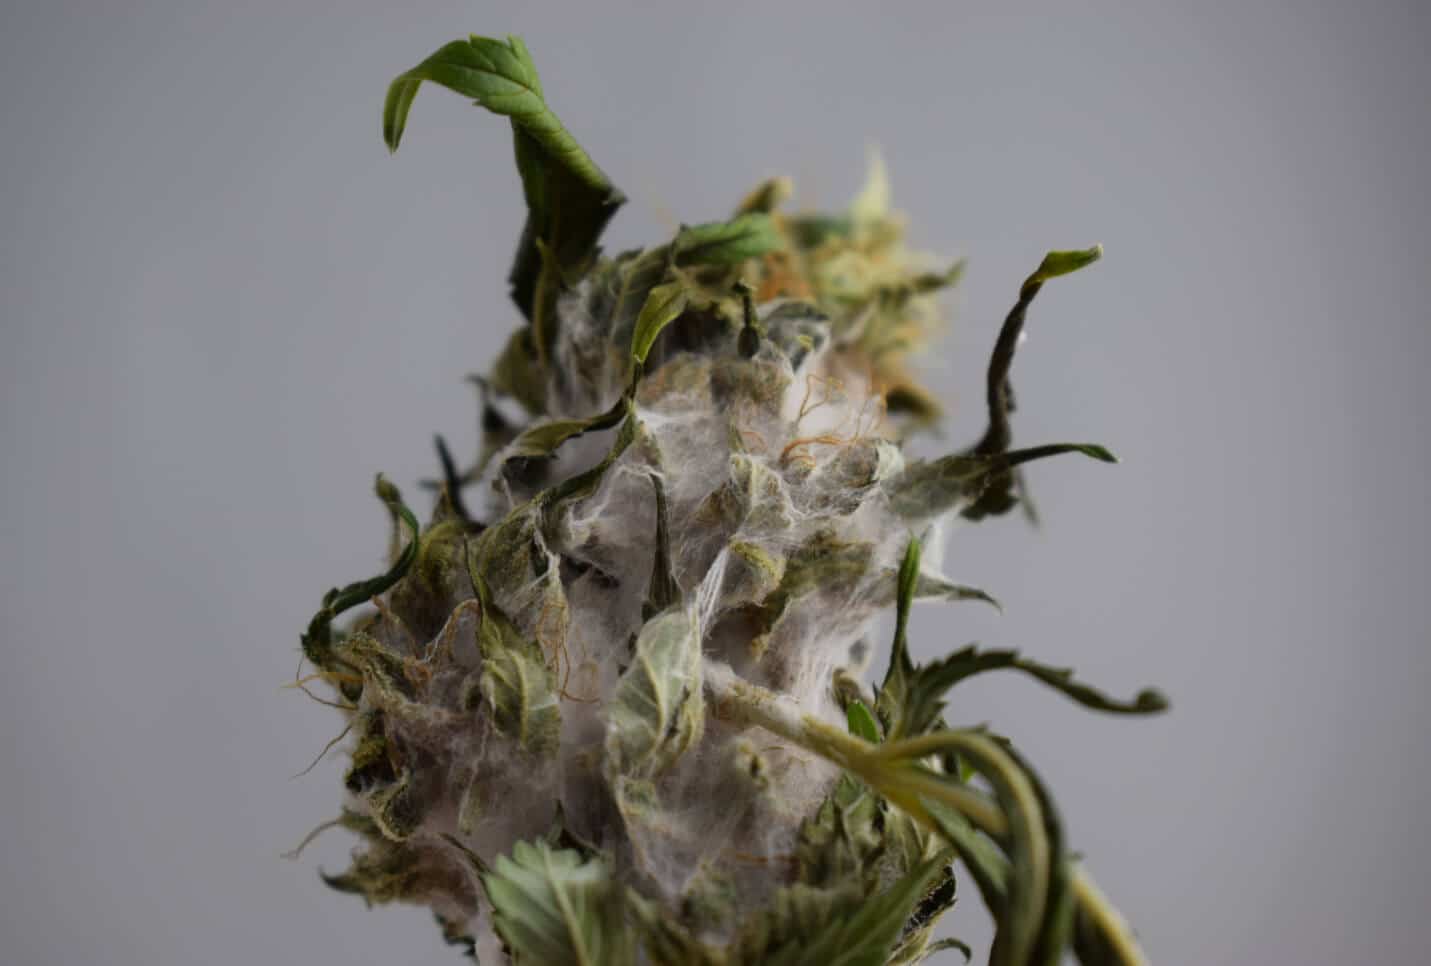  Environmental Factors: Uncovering the Causes of Bud Rot